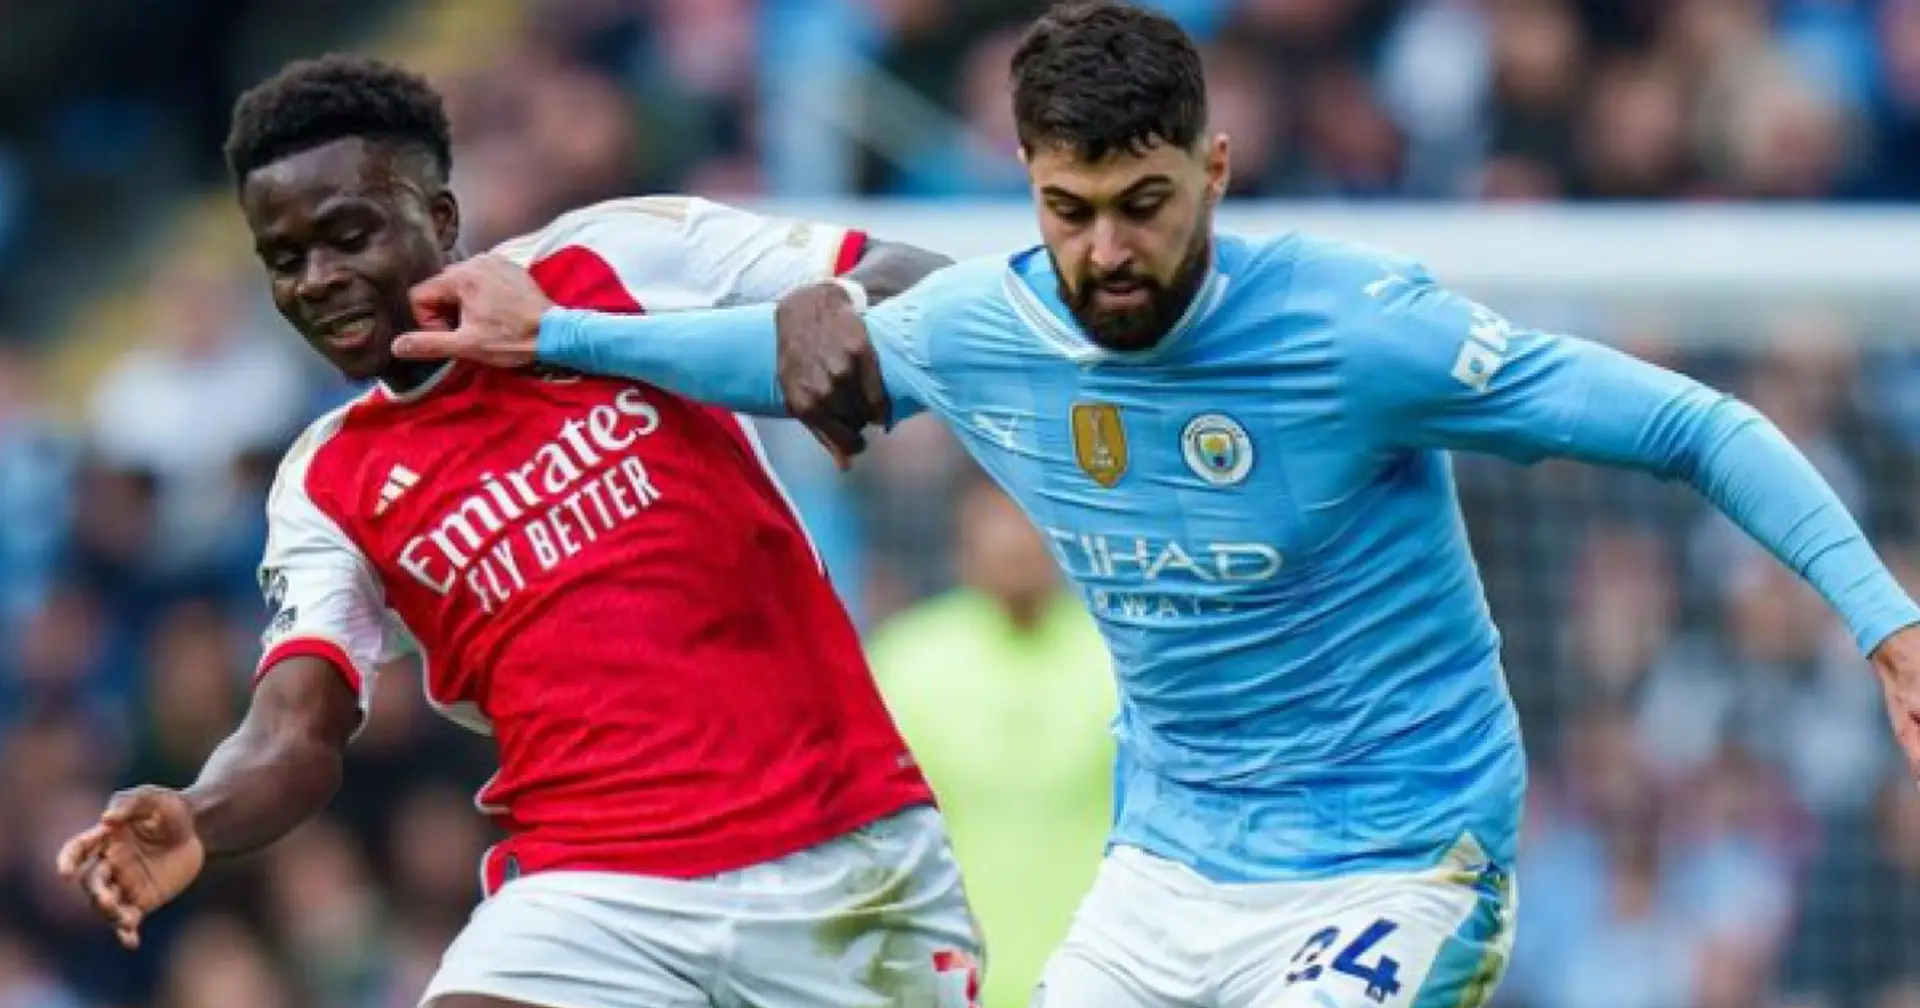 'If you ask me': Josko Gvardiol reveals who deserved the win more in Man City vs Arsenal game 